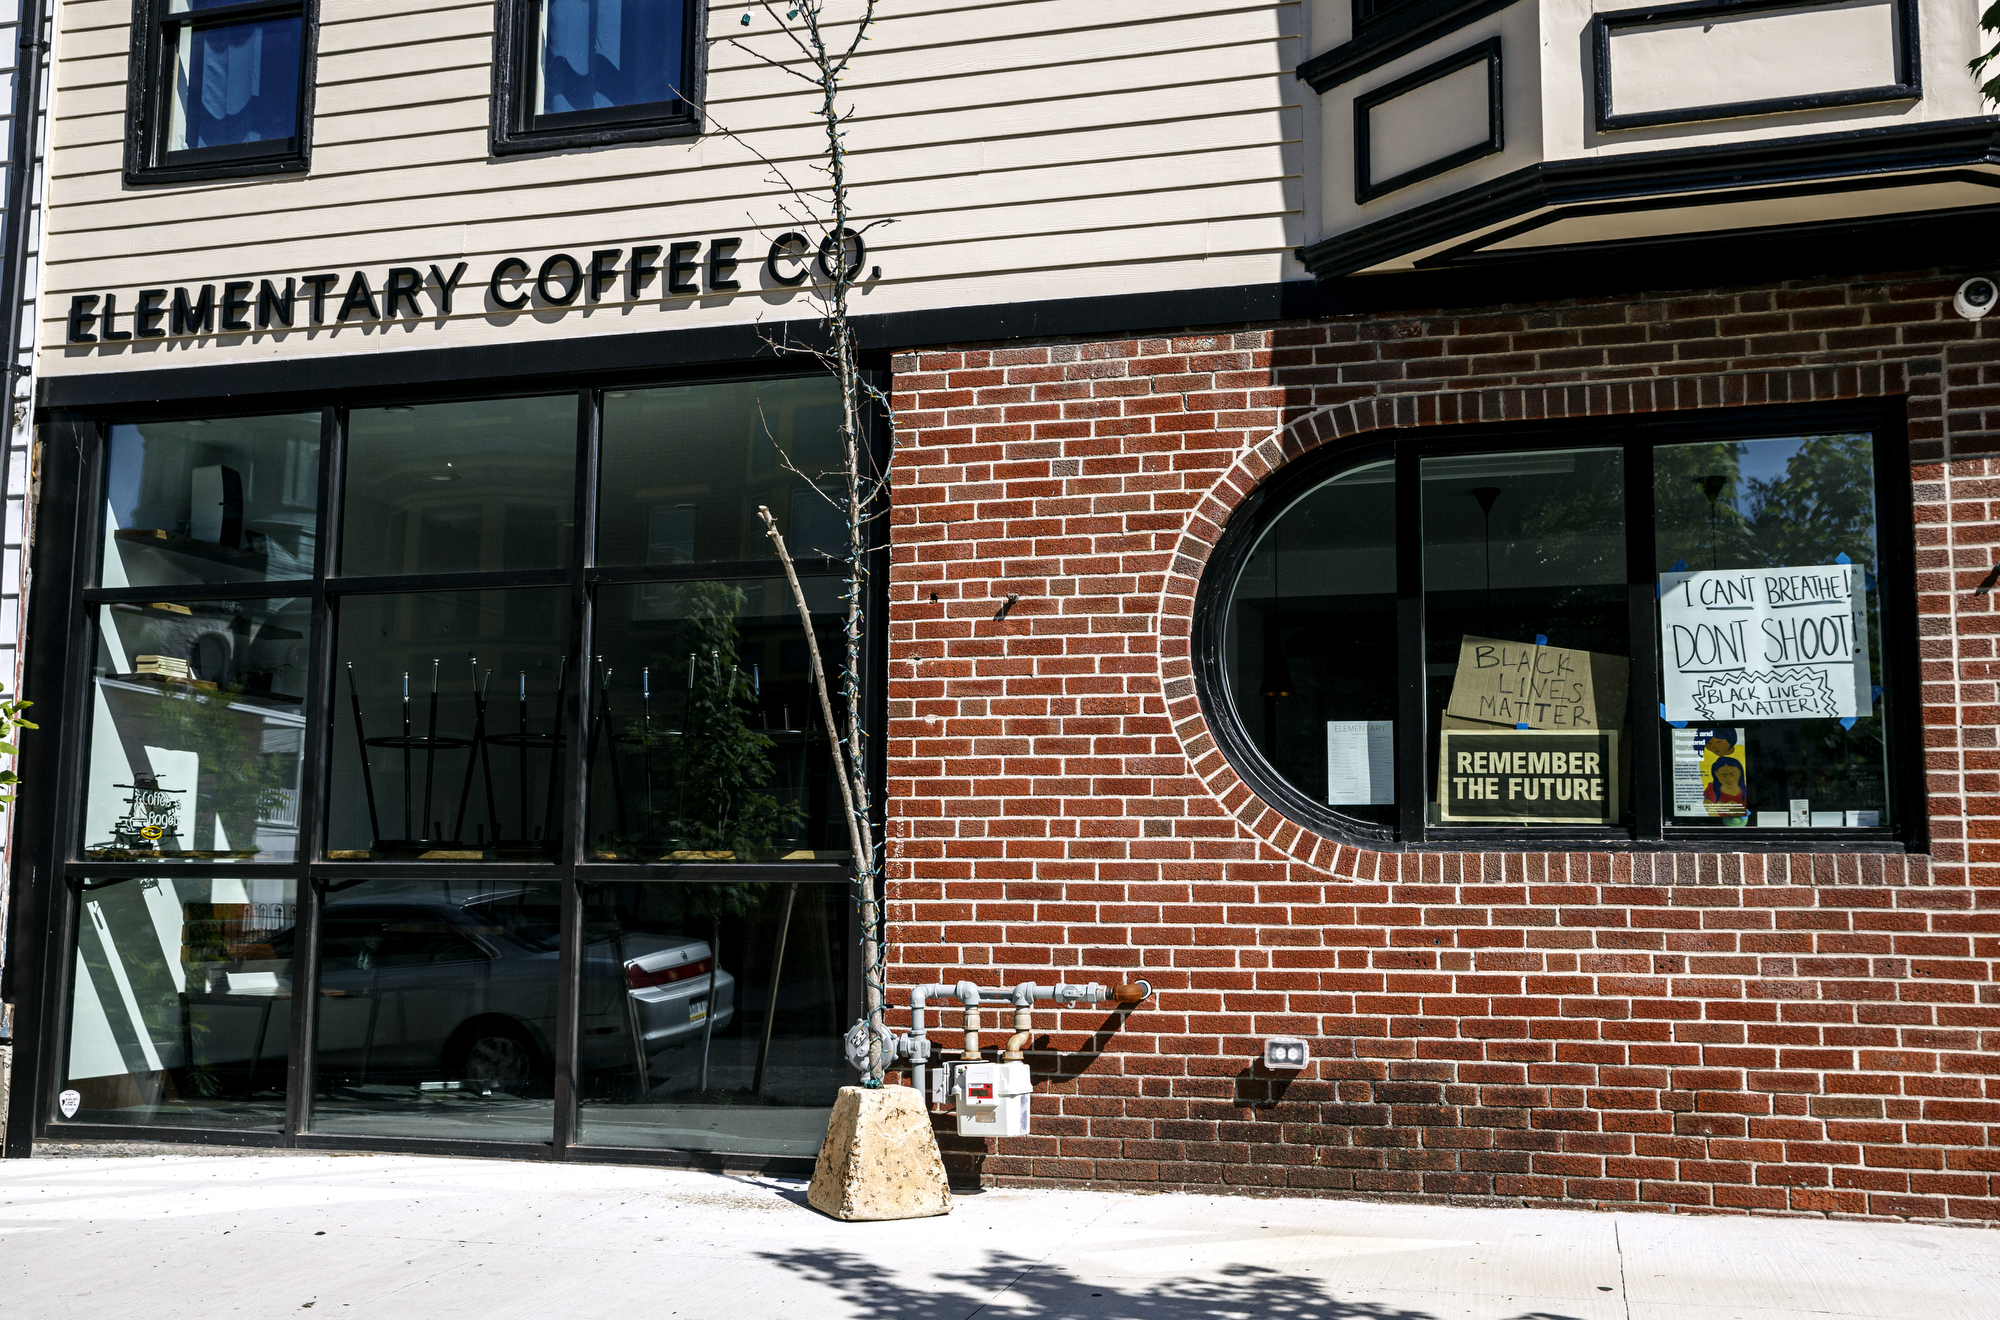 Elementary Coffee Co. on North Street has signs in the window reading "Black Lives Matter" and "I can't breathe. Don't shoot." The streets of Harrisburg the day after protests over the death of George Floyd turned violent.
May 31, 2020. 
Dan Gleiter | dgleiter@pennlive.com